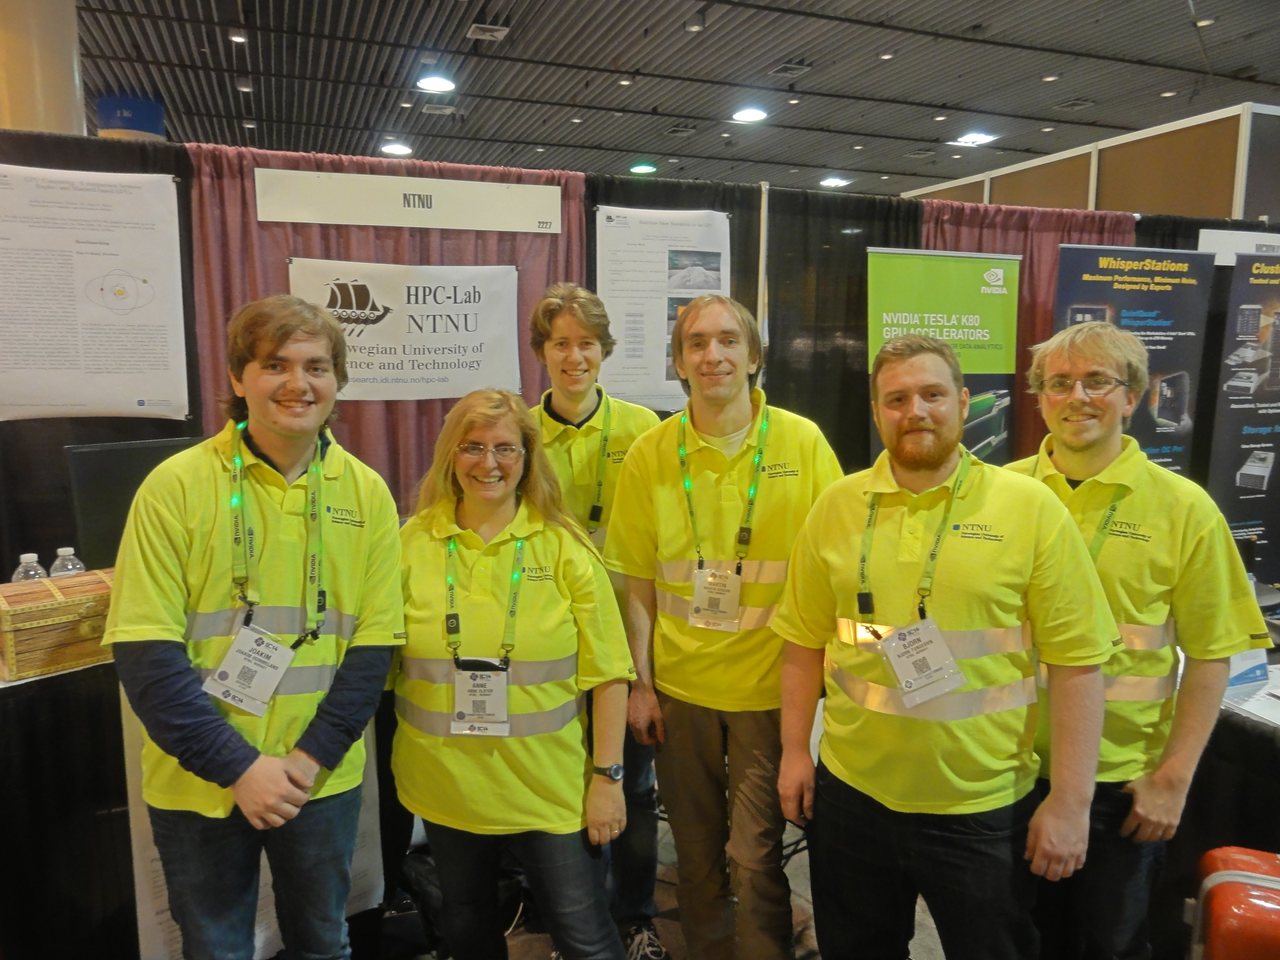 Photo from the HPC-Lab booth at SC14 in New Orleans, Nov 2014